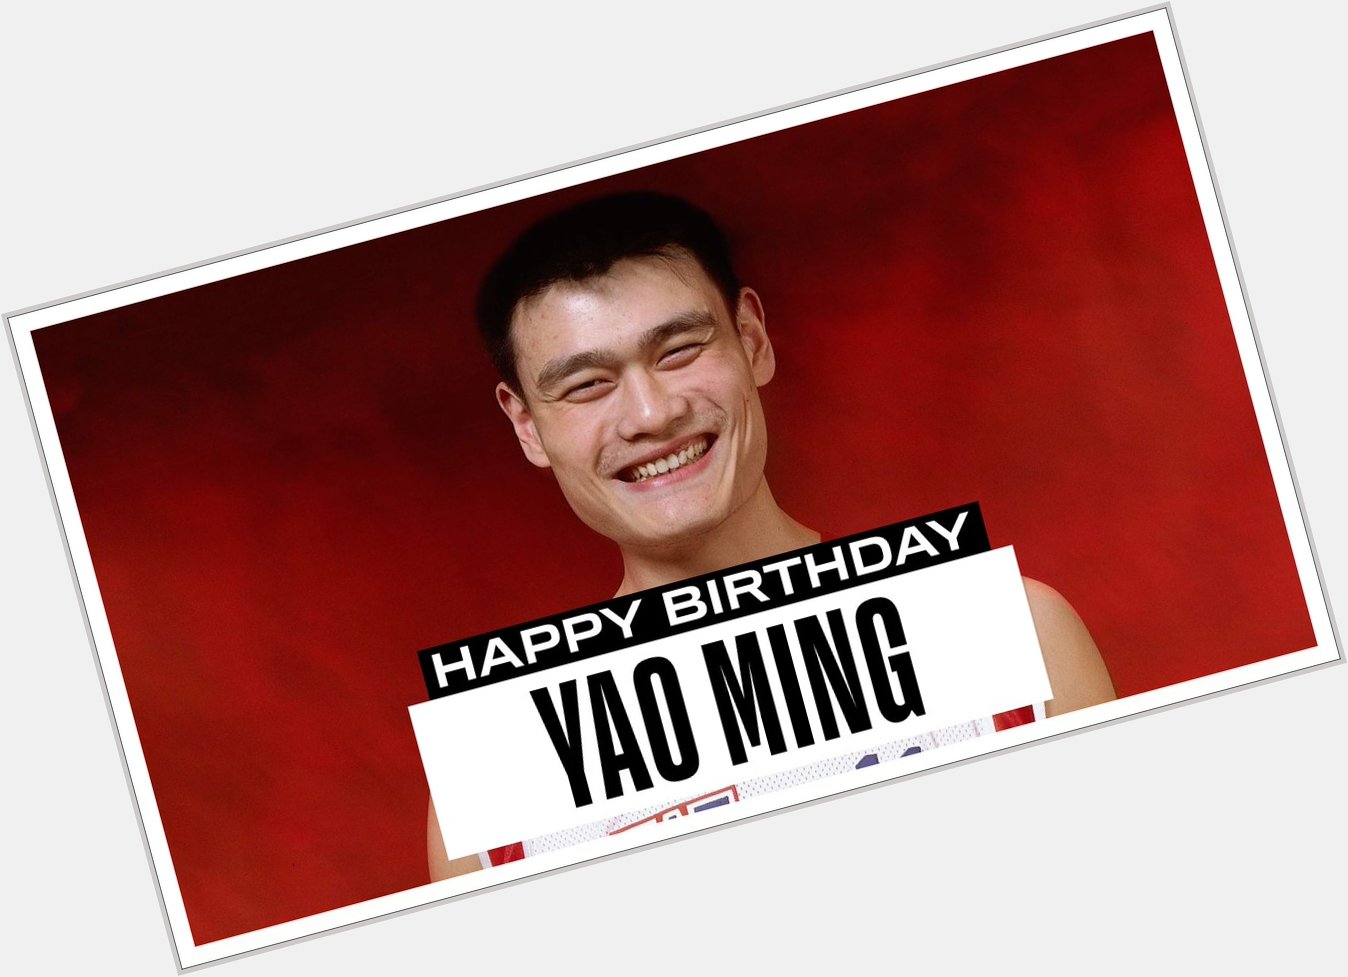 Join us in wishing a Happy 40th Birthday to 8x and inductee, Yao Ming! 